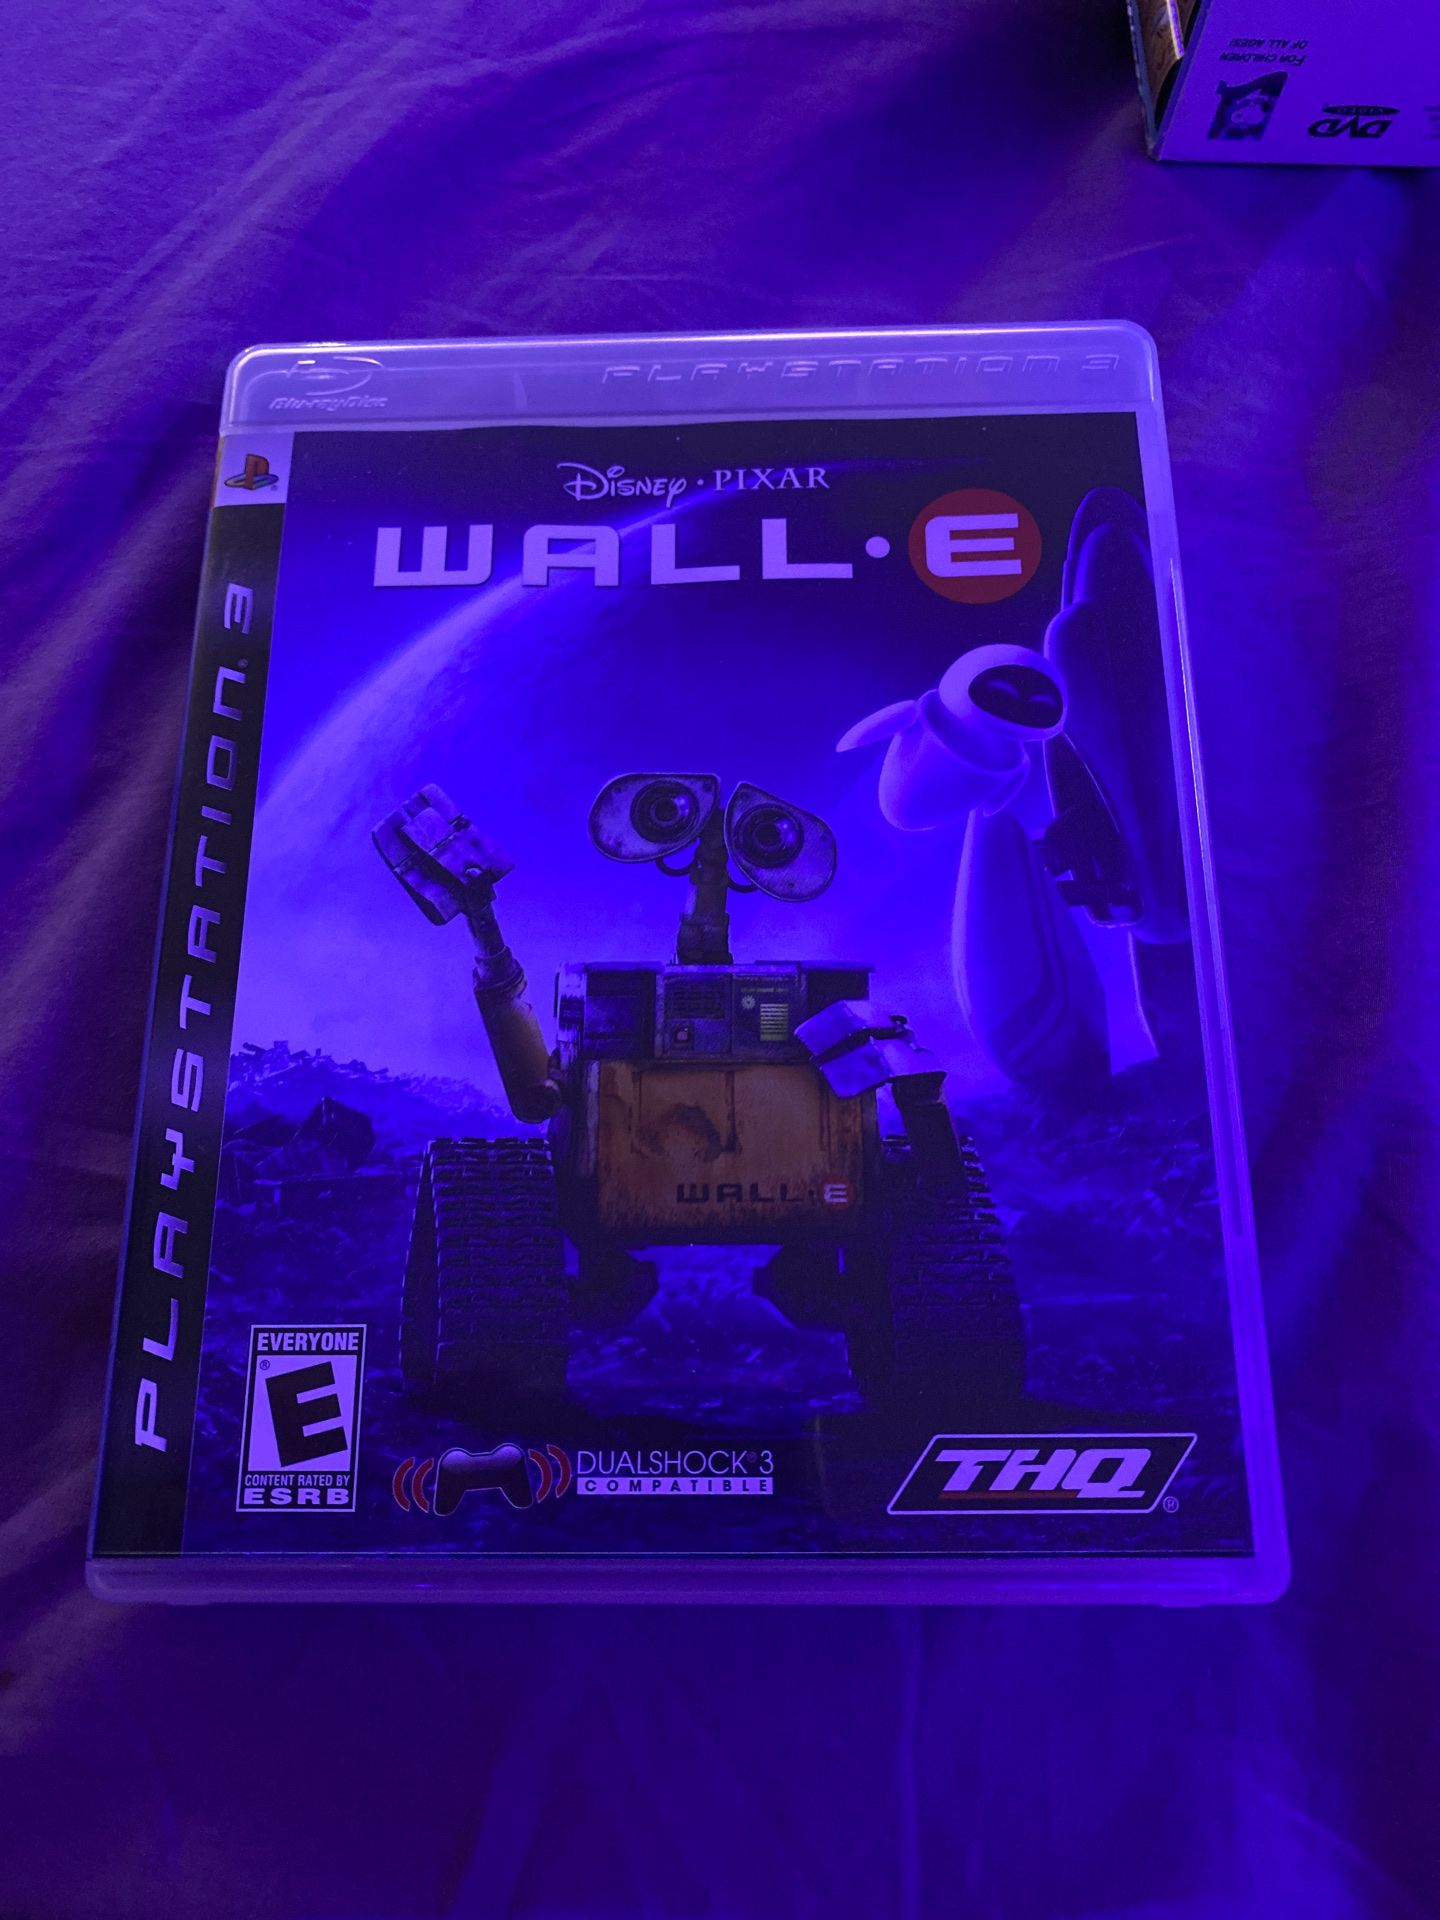 WallE PS3